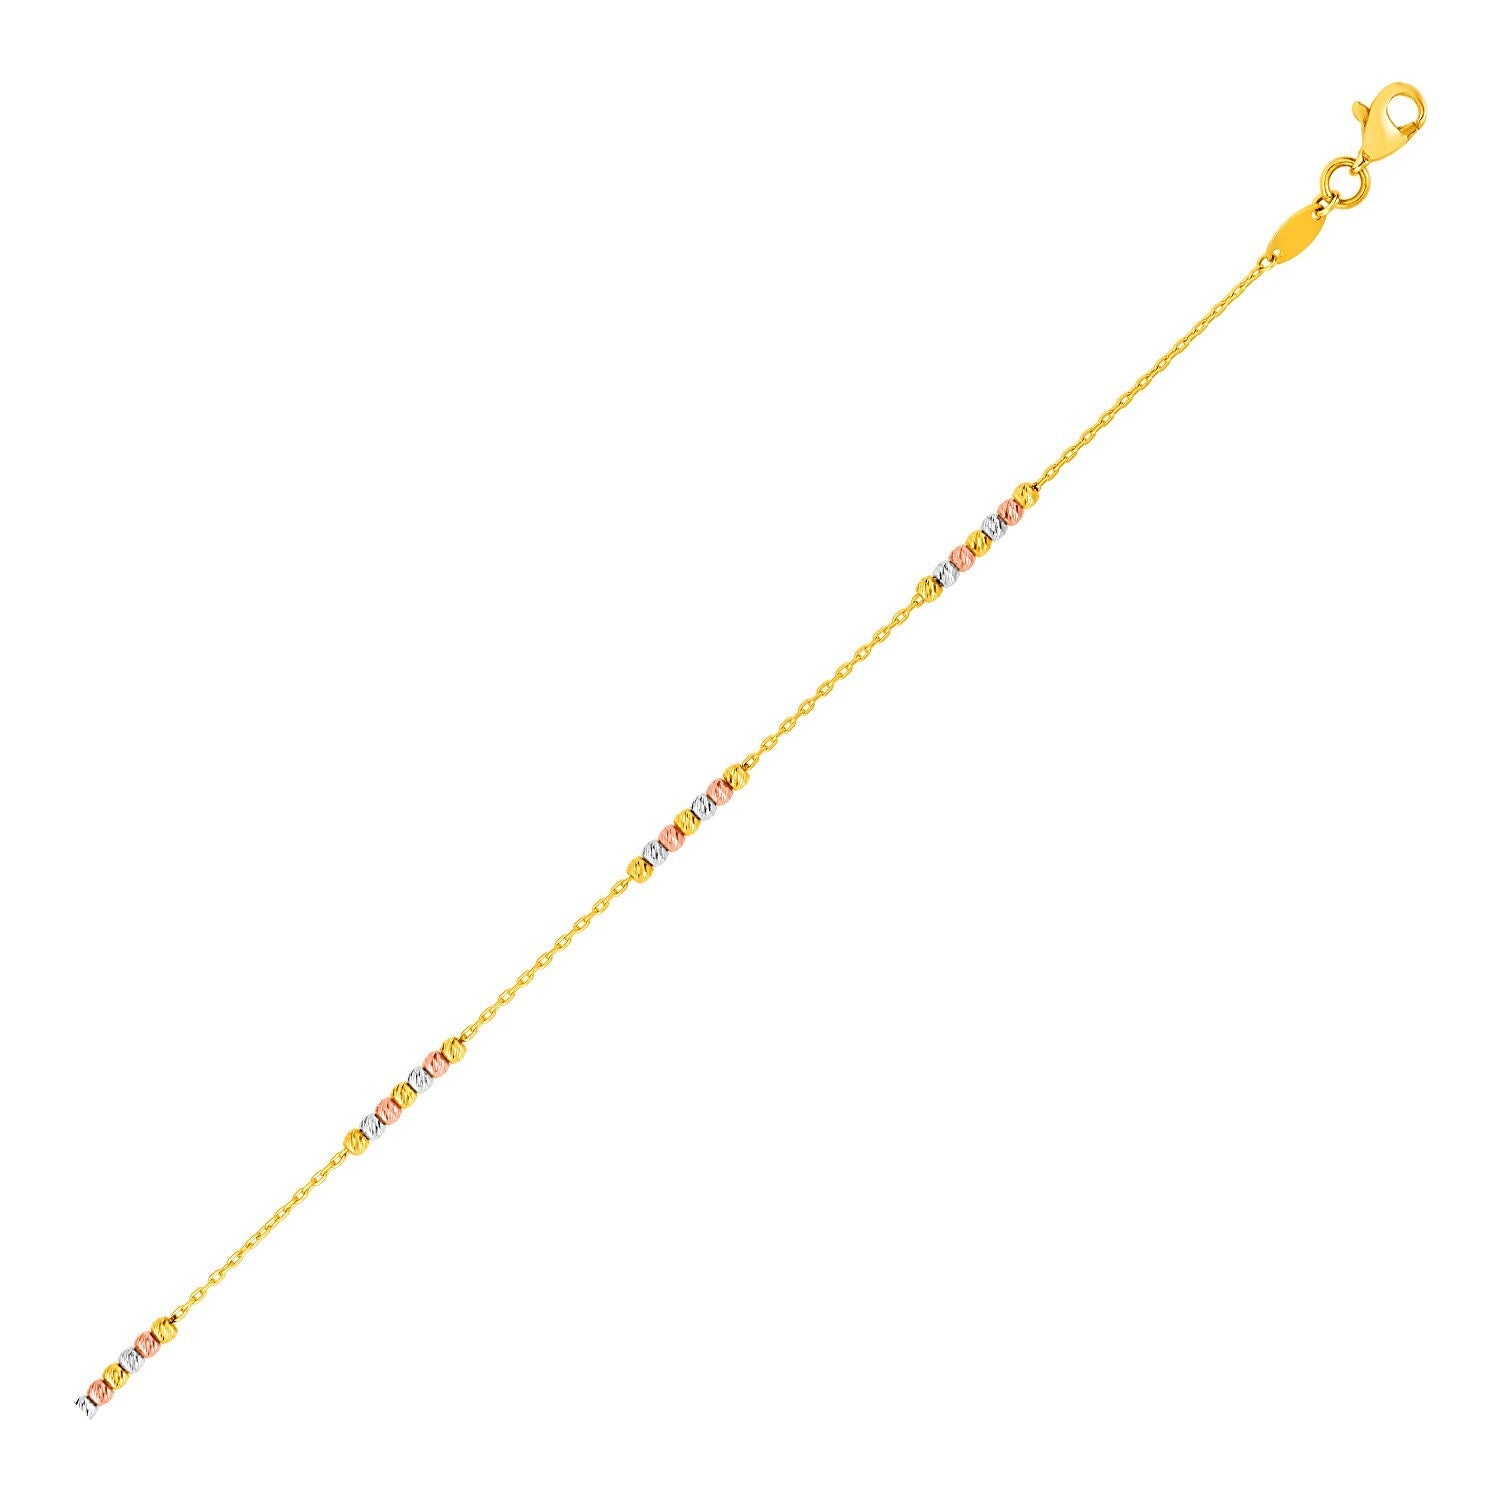 14k Tri Color Gold Anklet with Textured Beads, size 10''